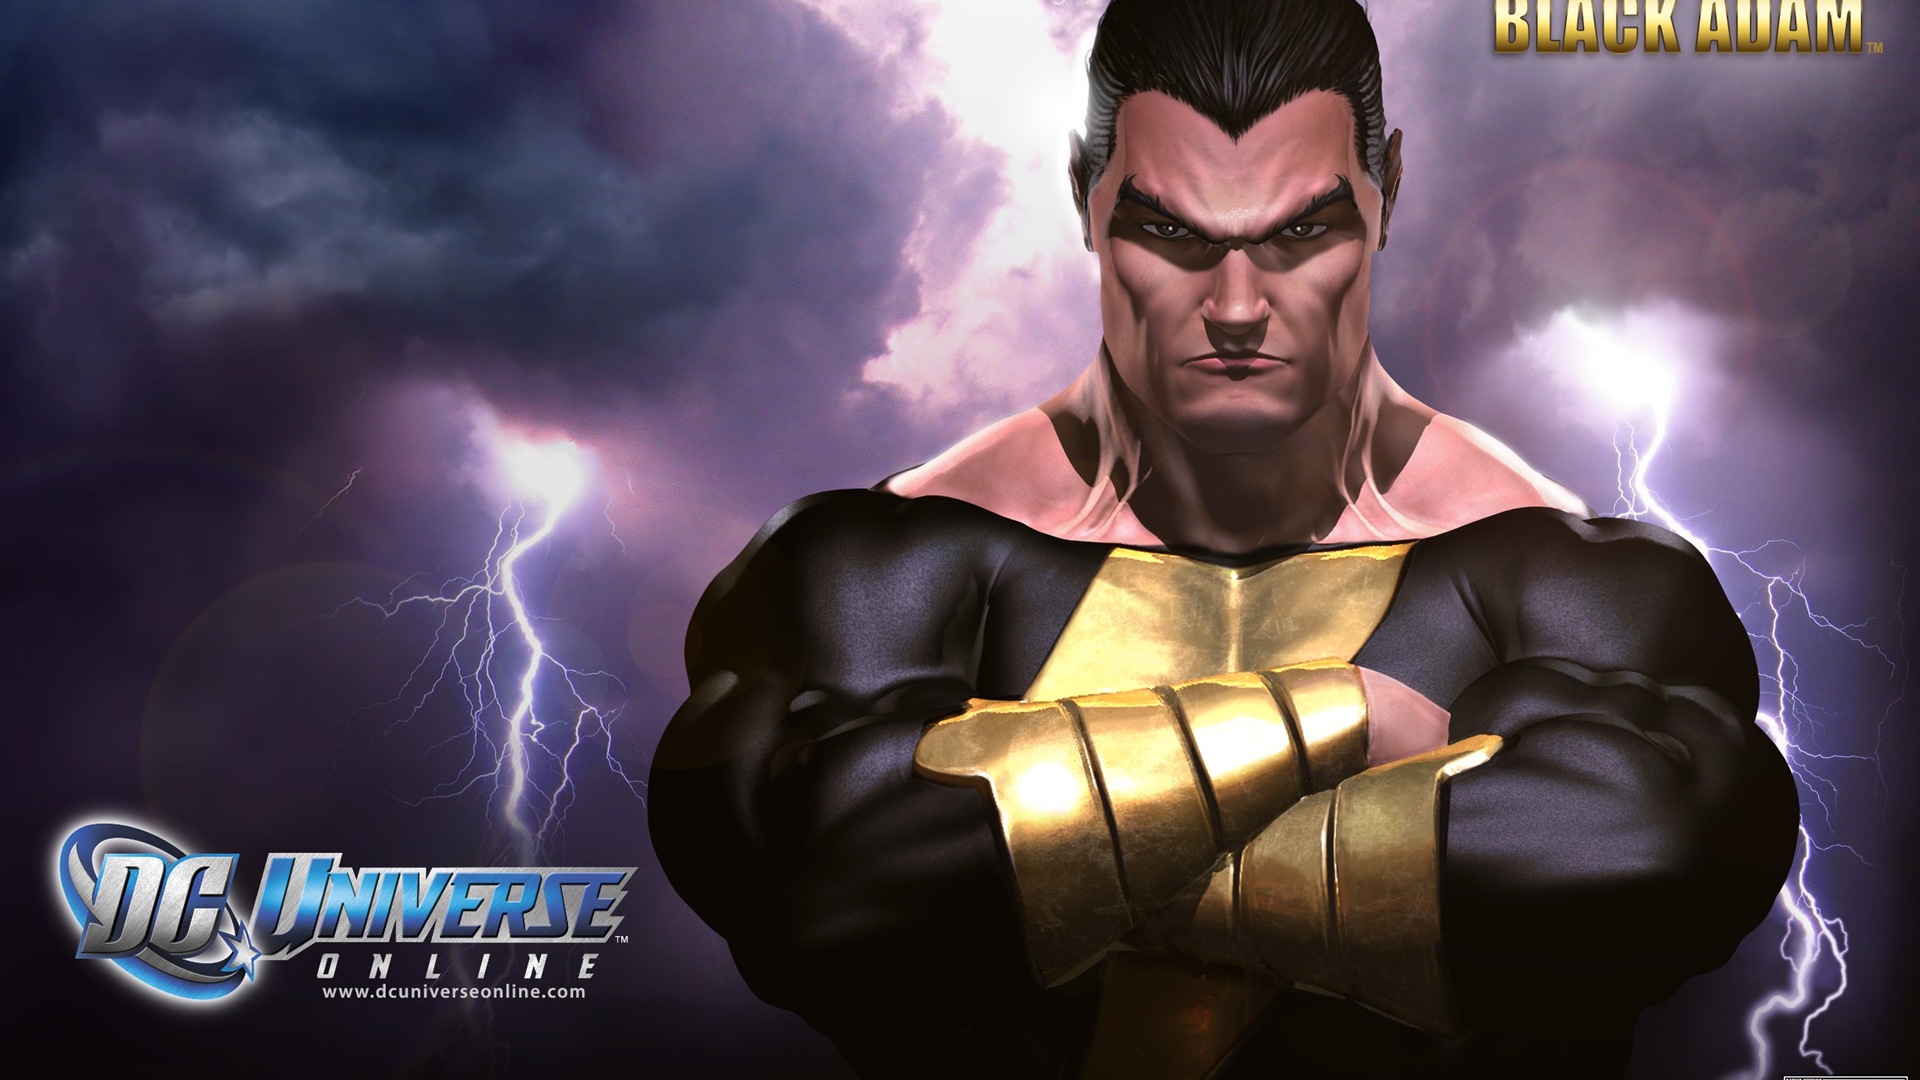 DC Universe Online HD game wallpapers #15 - 1920x1080